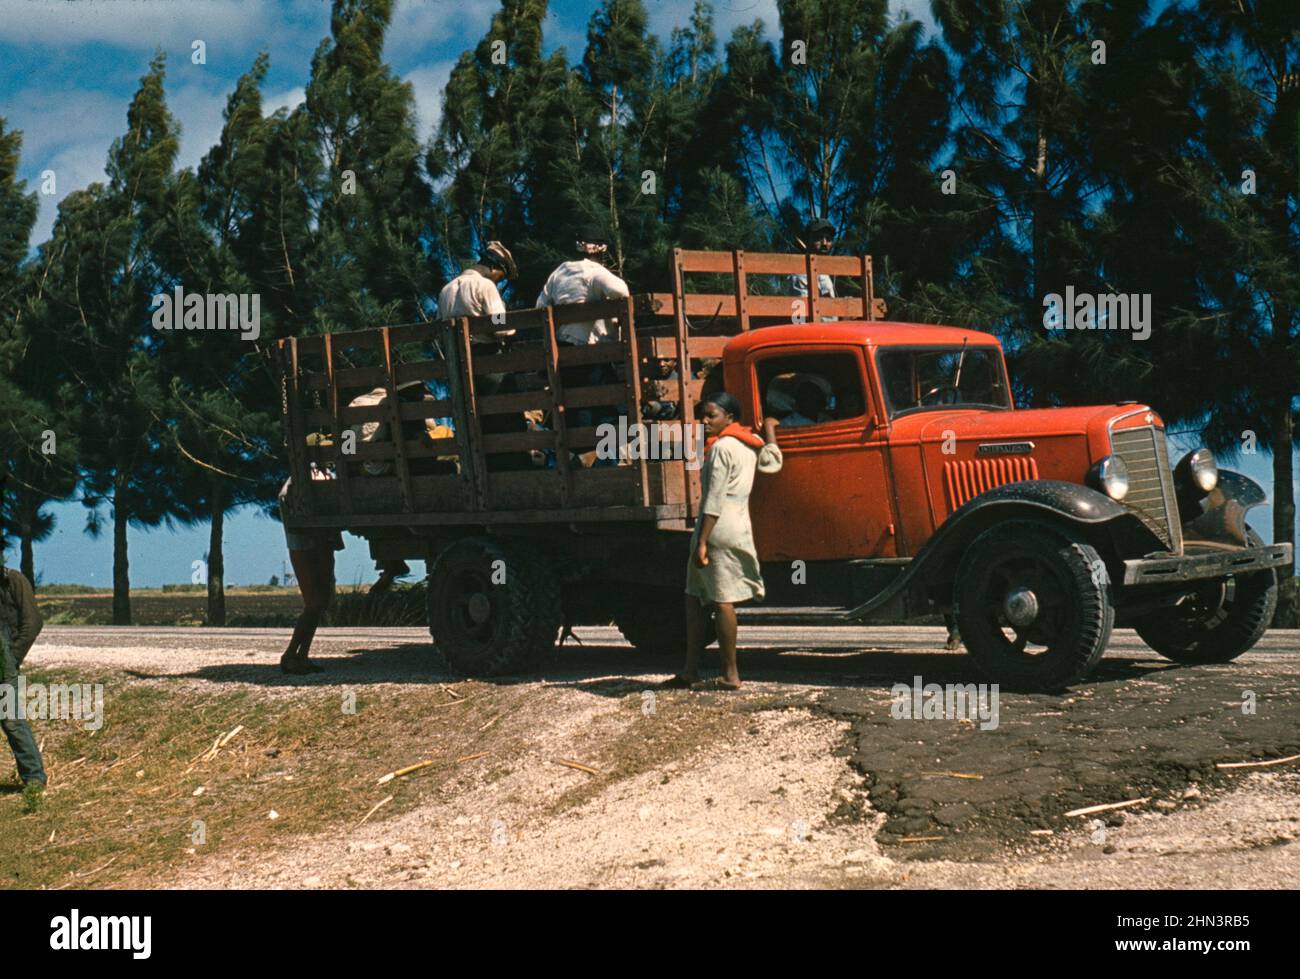 Vintage color photo of American South life in 1940s. Mississippi. 1940 Photograph shows a 1934-1936 International C30 truck transporting people who mi Stock Photo